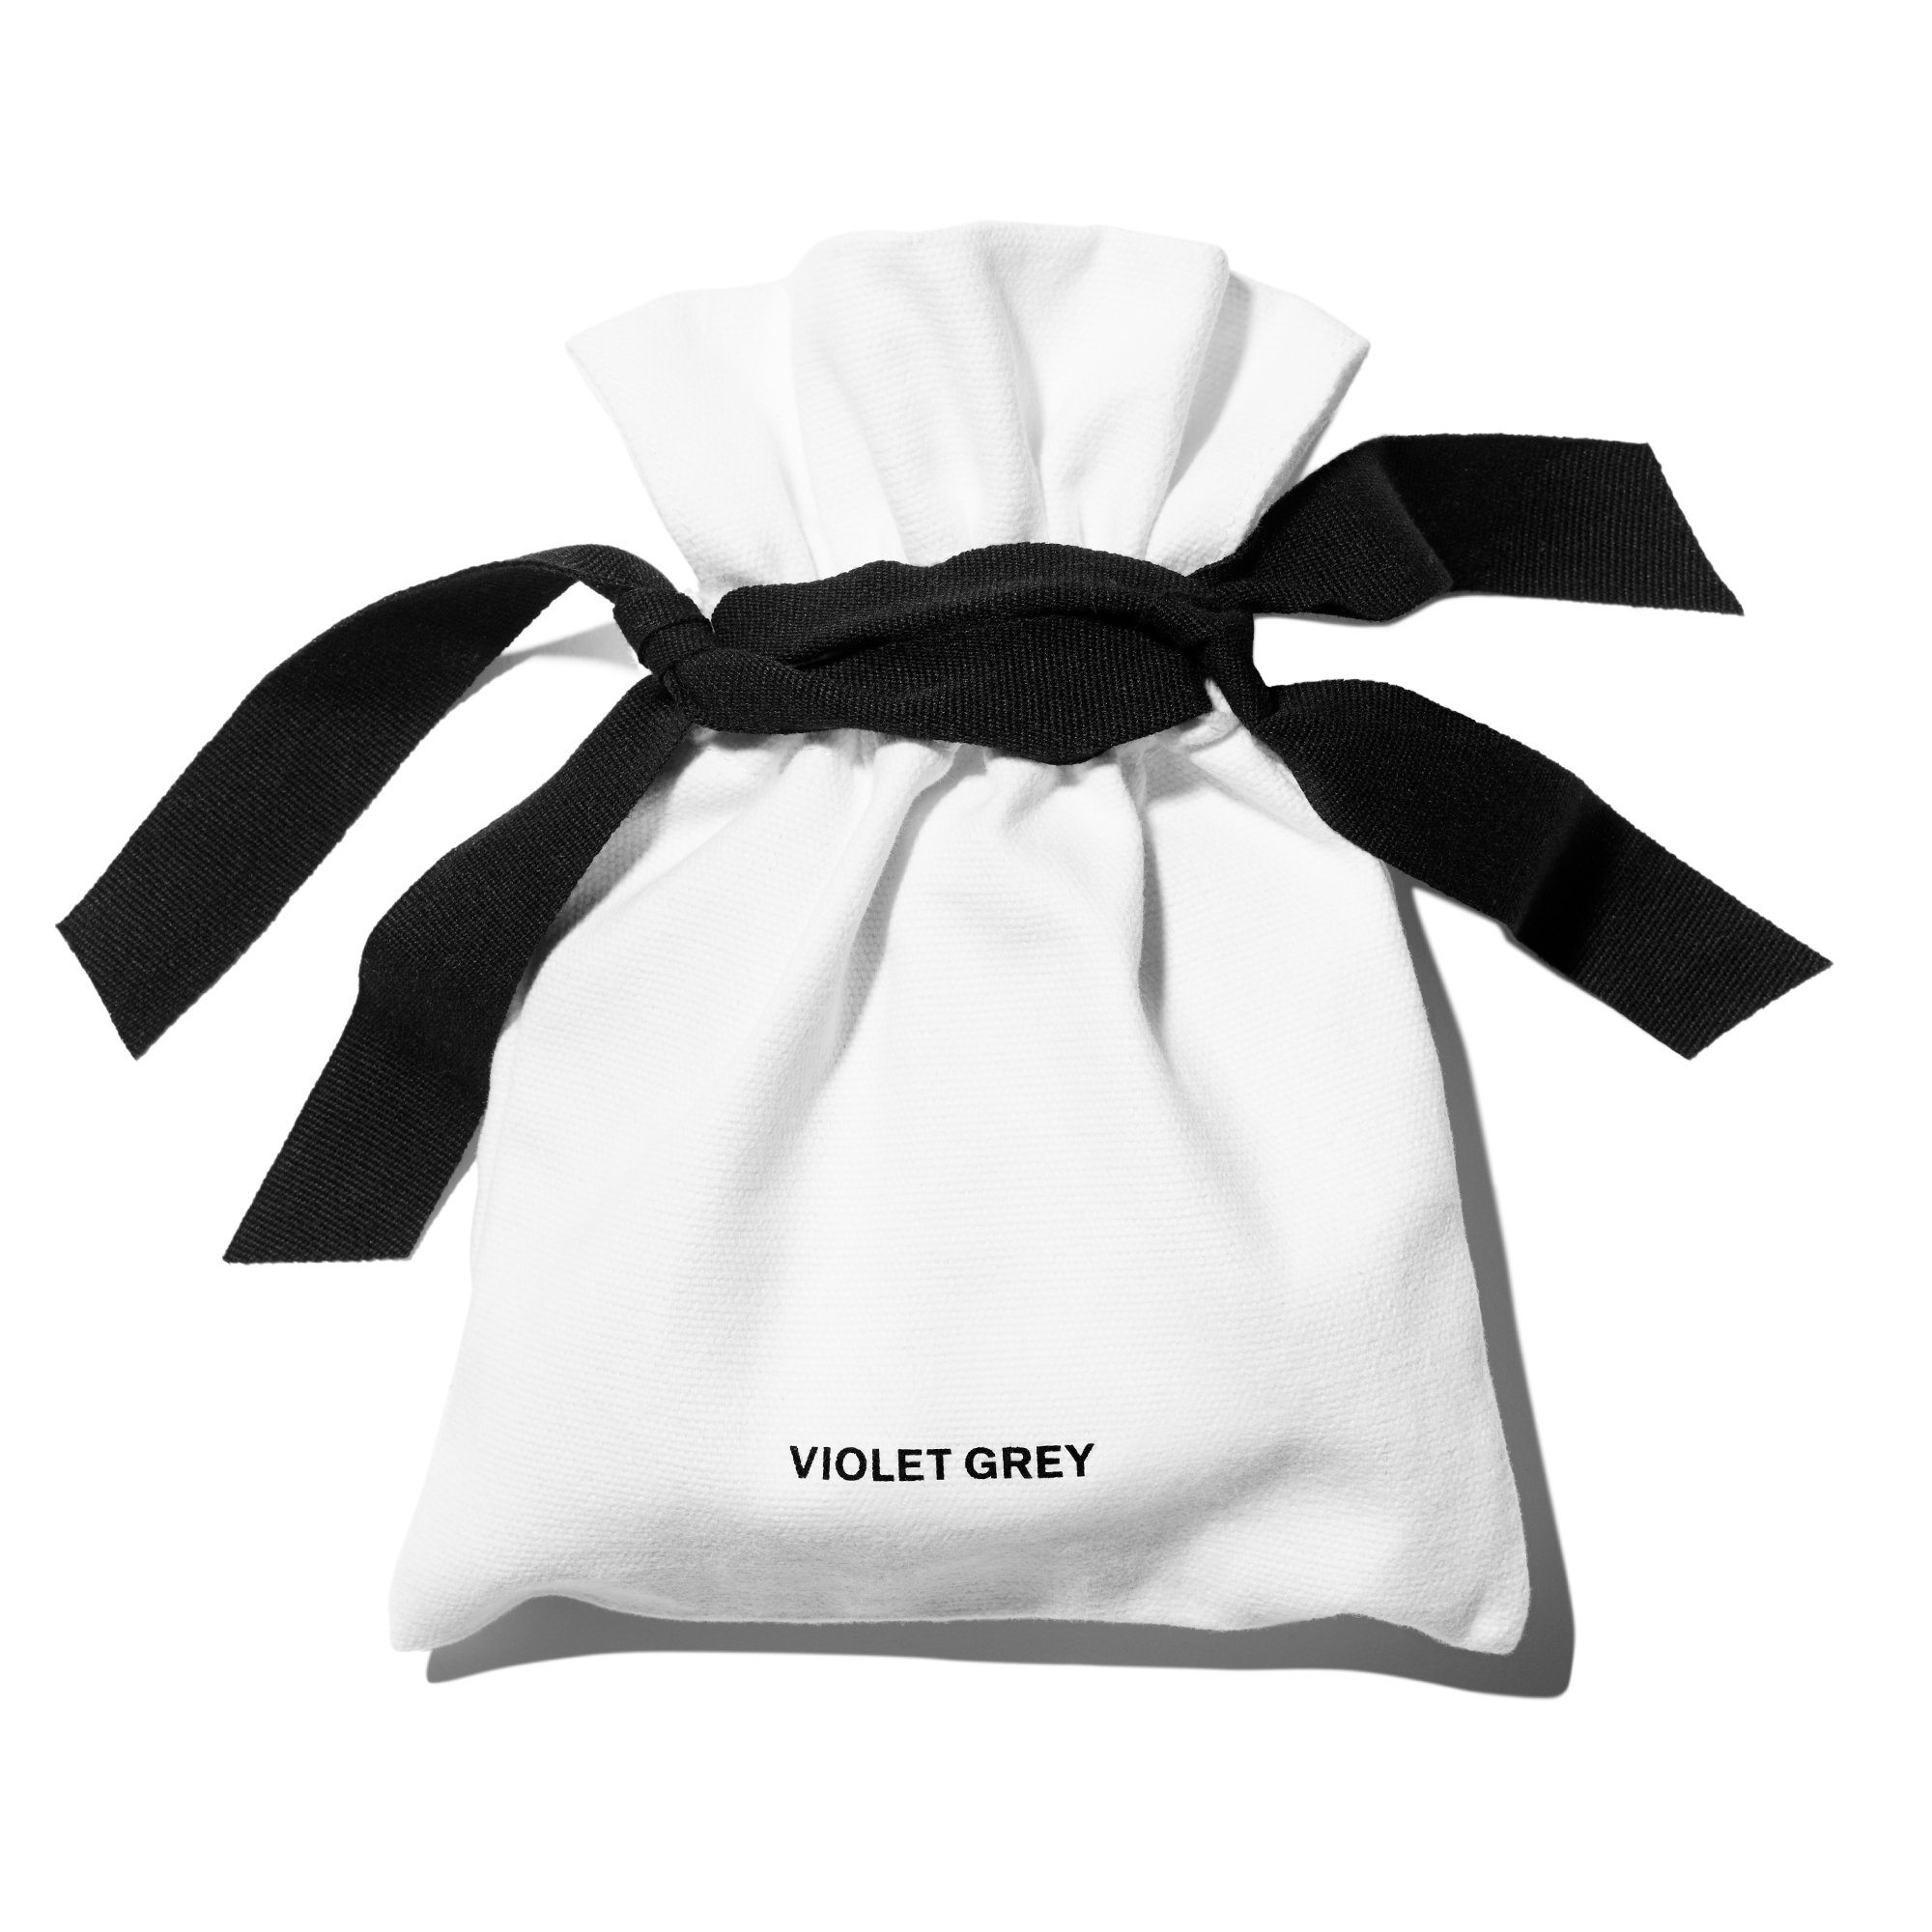 VIOLET GREY complimentary duster bag for beauty, skin care and hair care essentials with purchases of $100 or more.